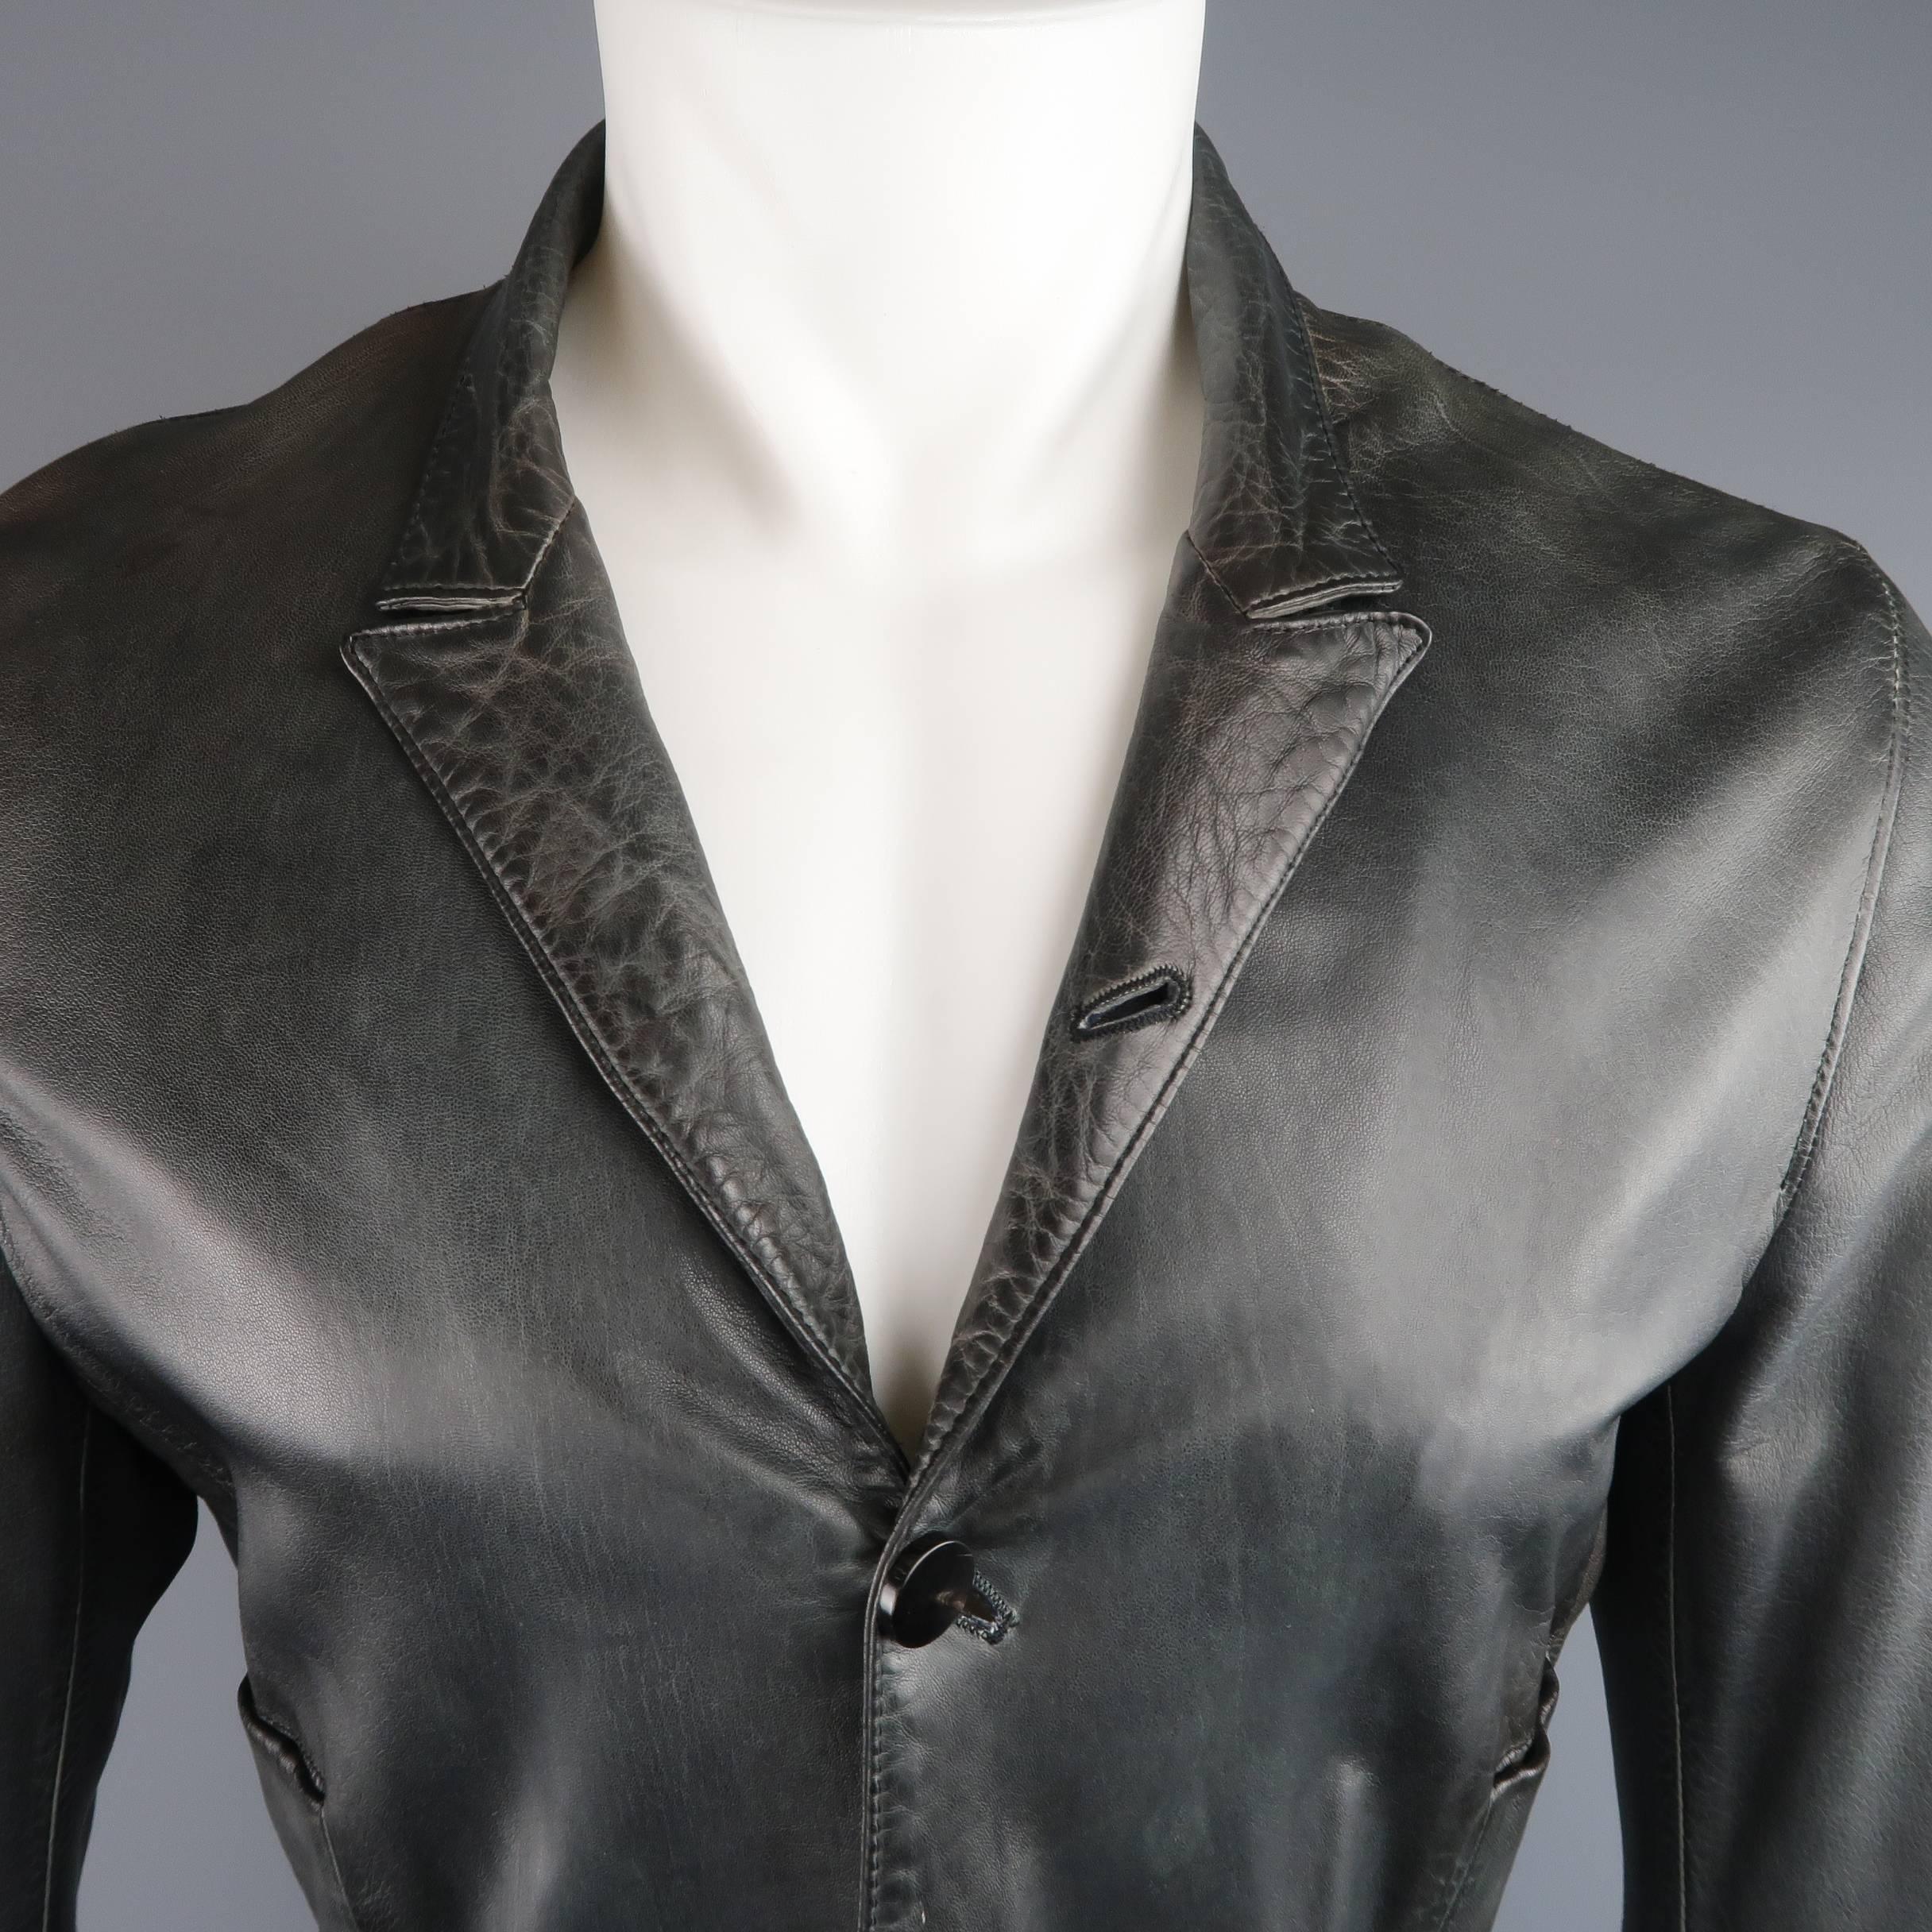 UN SOLO MONDO jacket comes in a smooth charcoal leather with unique distressed qualities throughout and features a peak lapel, half hidden, four button front, slit pockets, side belts, and double vented back. Made in Italy.
 
Good Pre-Owned